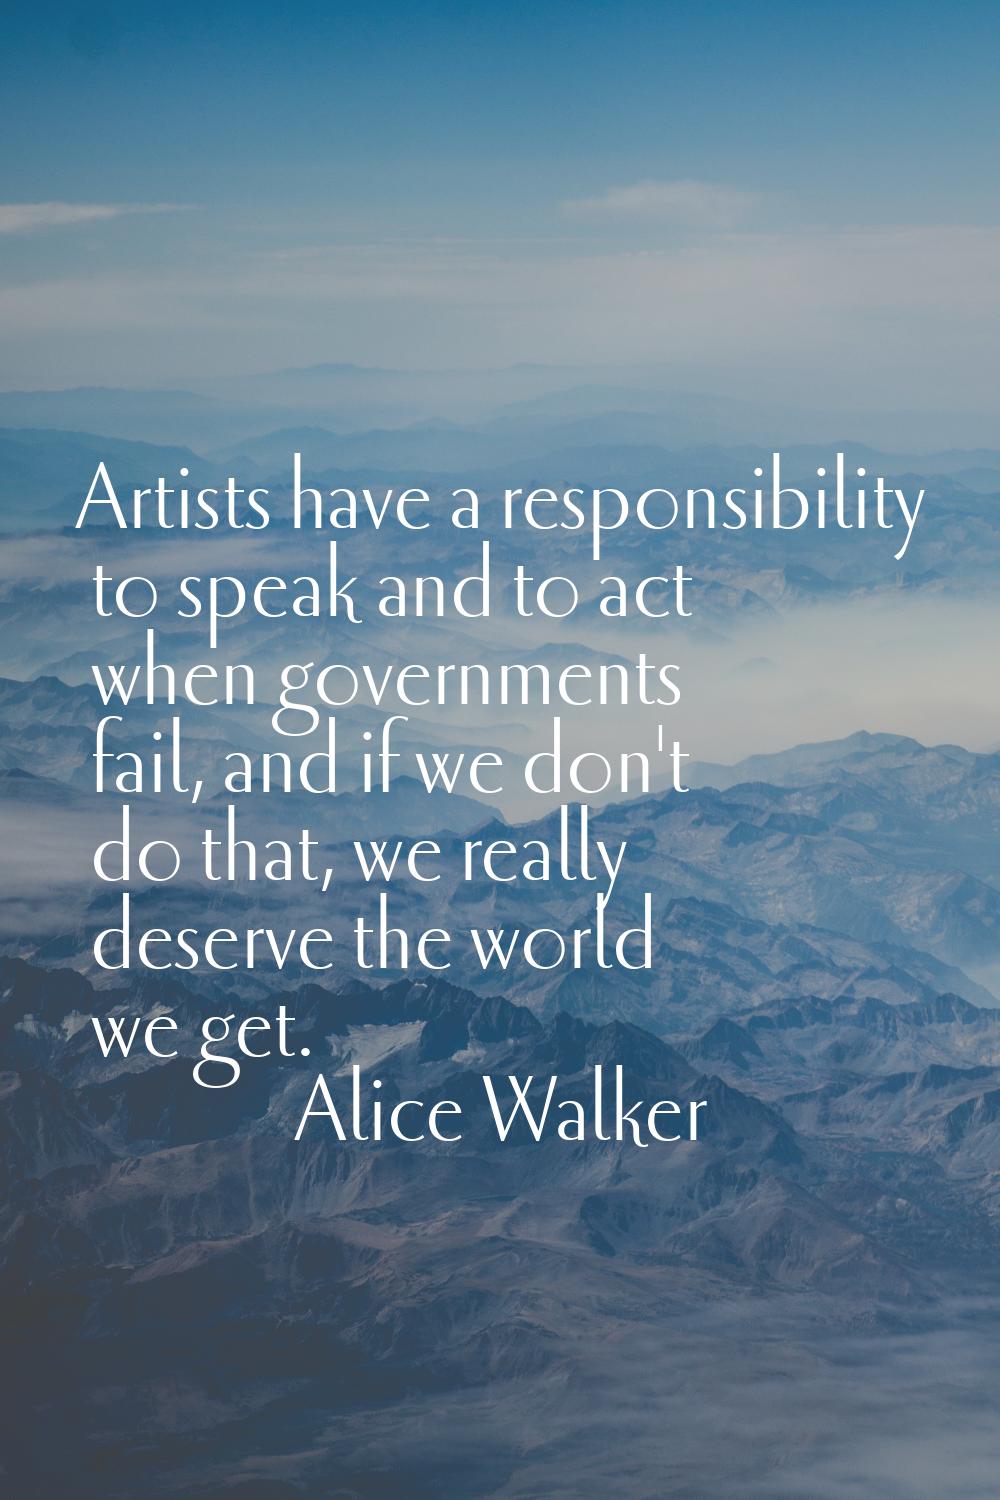 Artists have a responsibility to speak and to act when governments fail, and if we don't do that, w